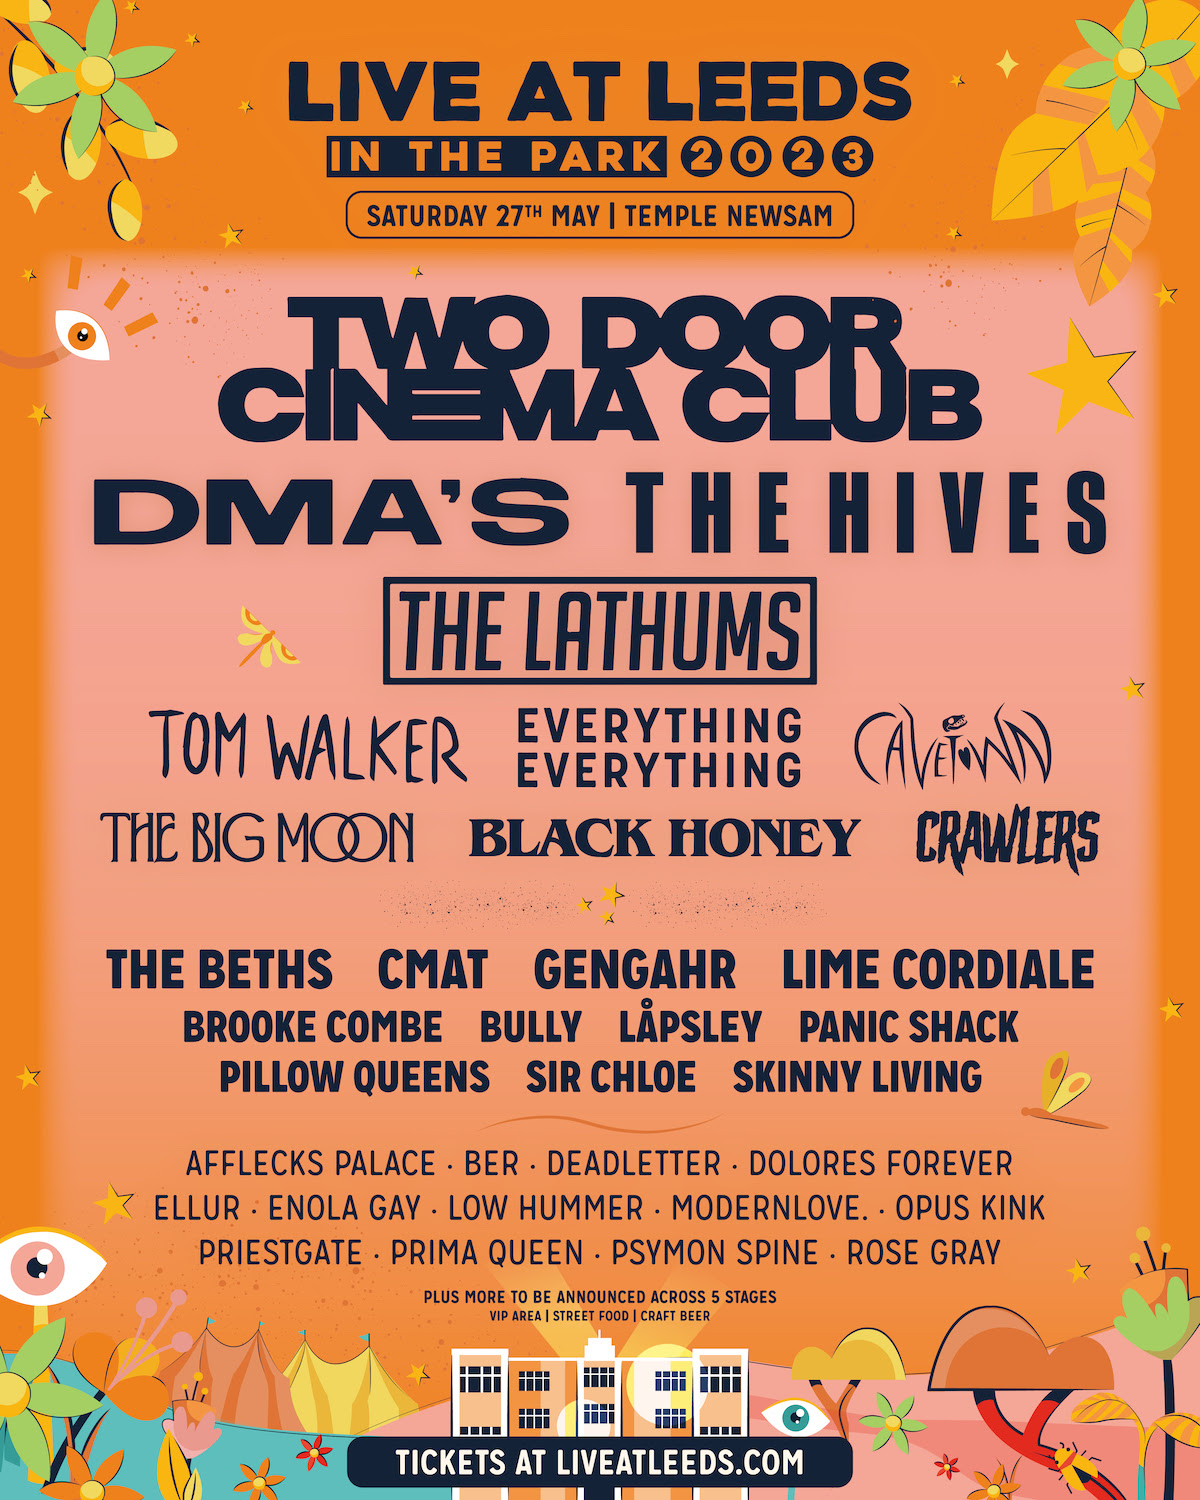 Live at leeds: in the park 2023 line up poster